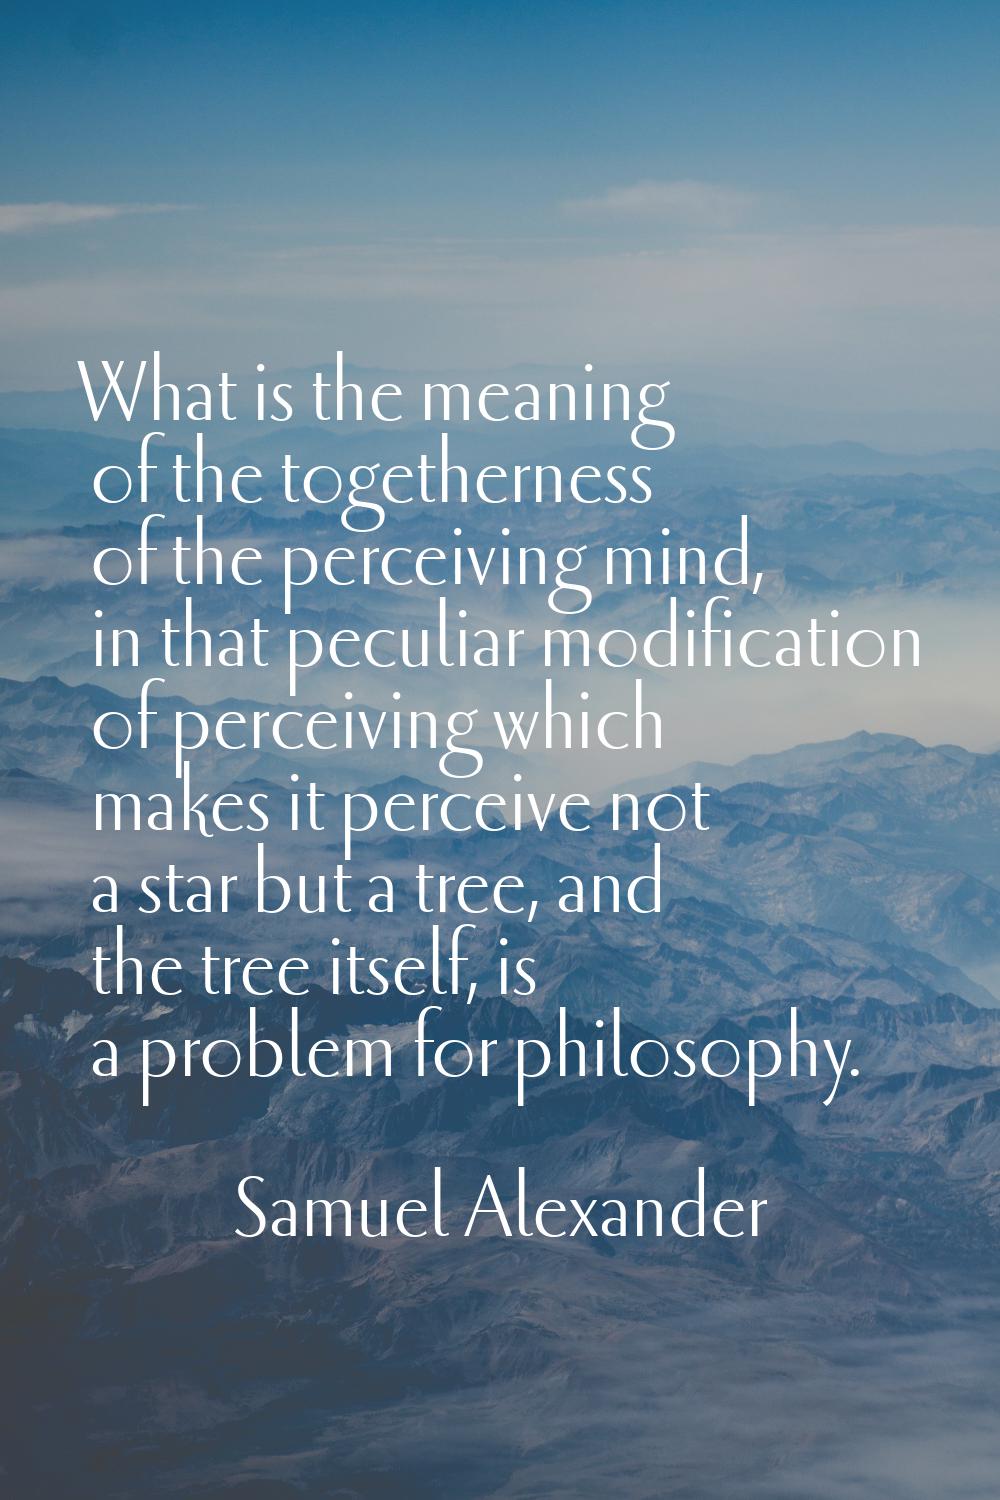 What is the meaning of the togetherness of the perceiving mind, in that peculiar modification of pe